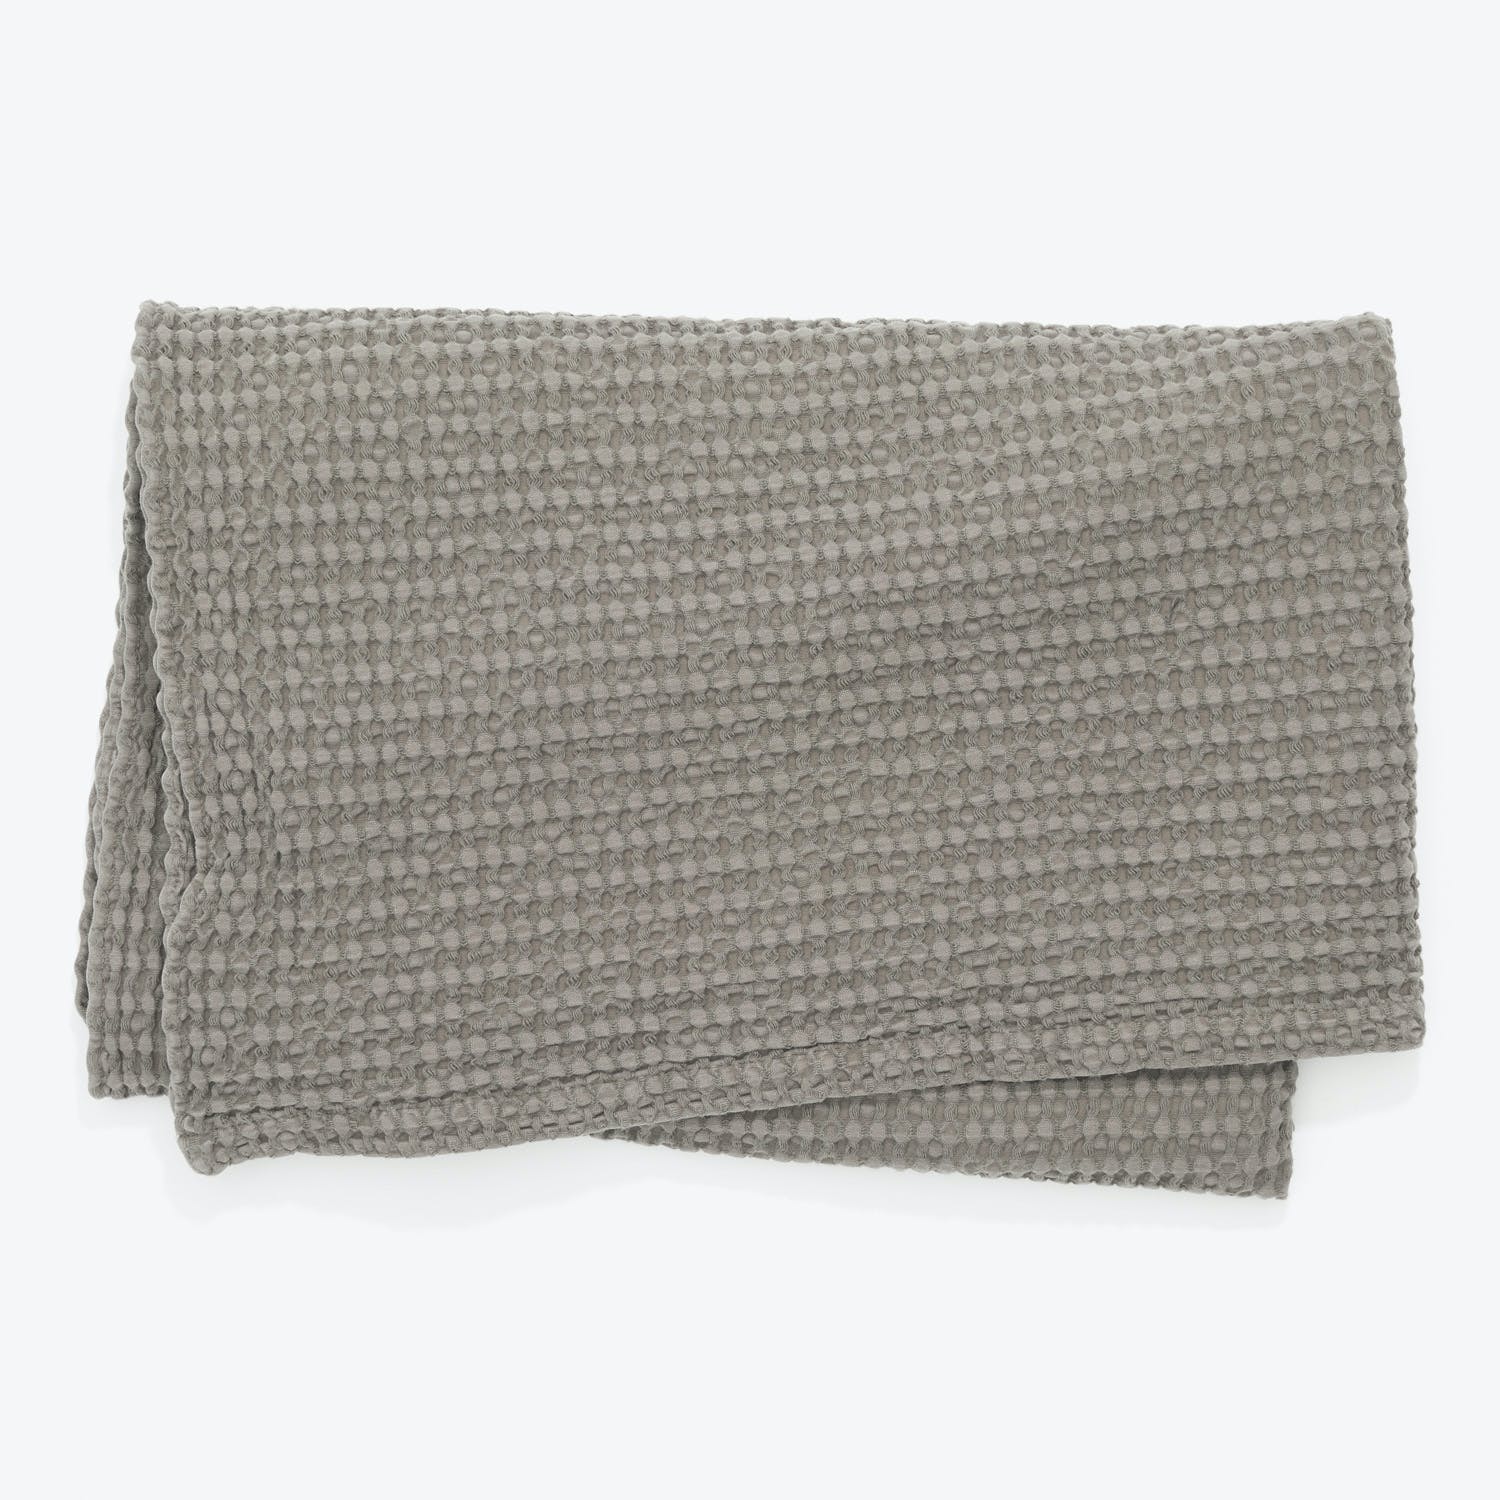 Cozy and stylish, a folded gray blanket with waffle texture.